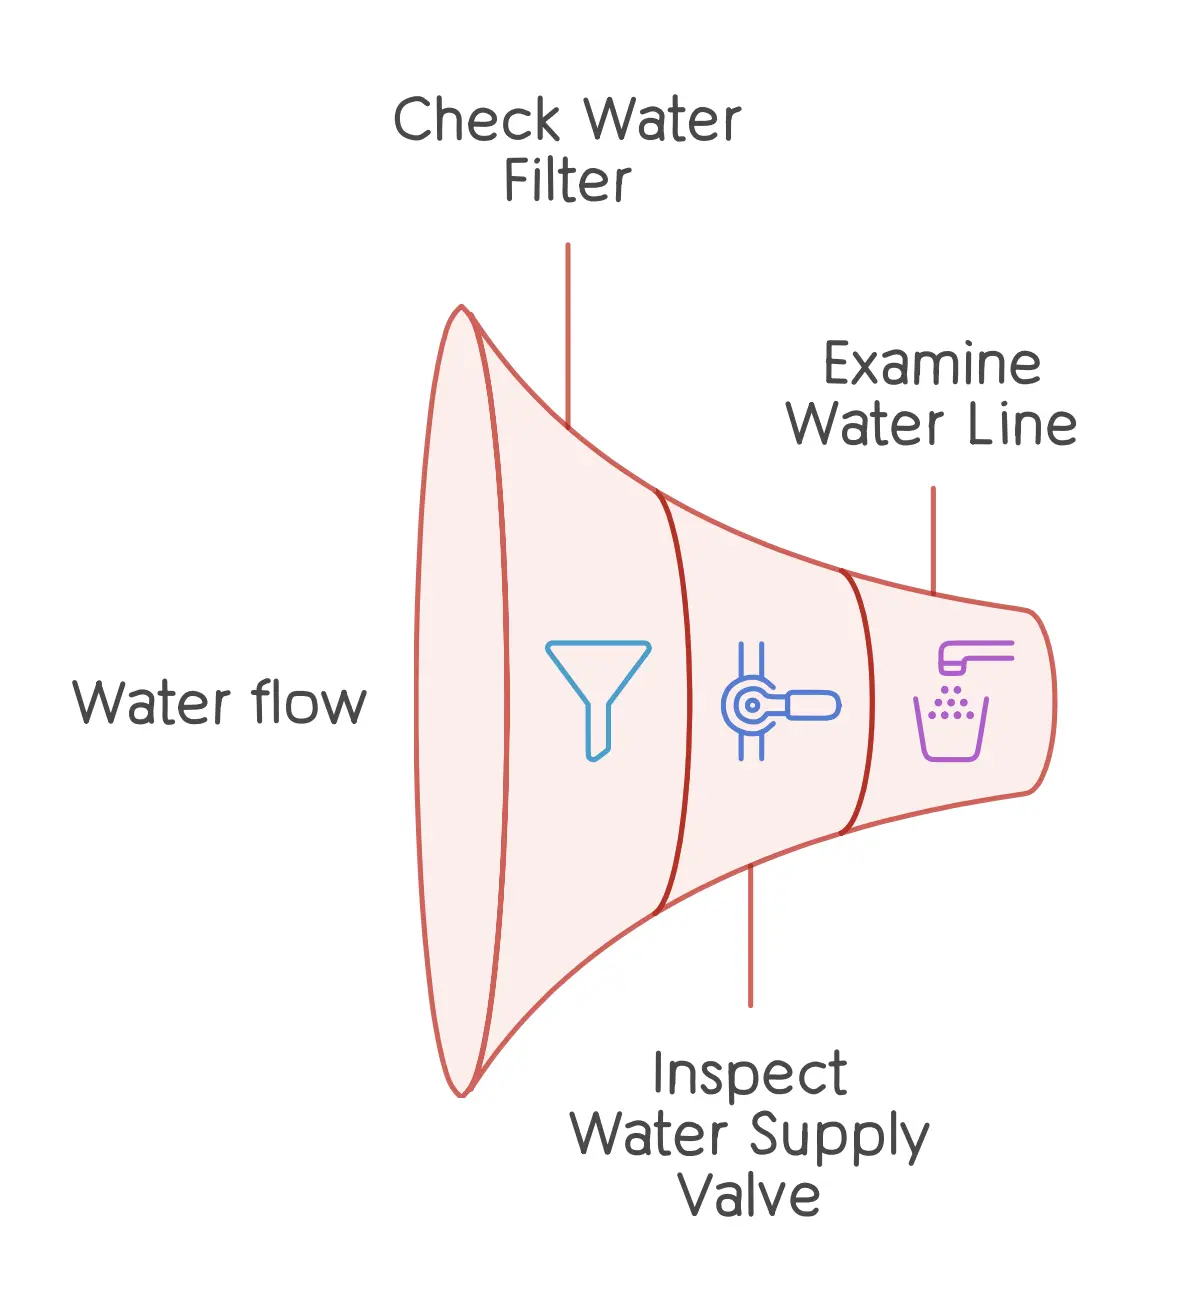 A graphic illustrating the components of a municipal water supply system. The graphic shows how water is collected, treated, and distributed to consumers.